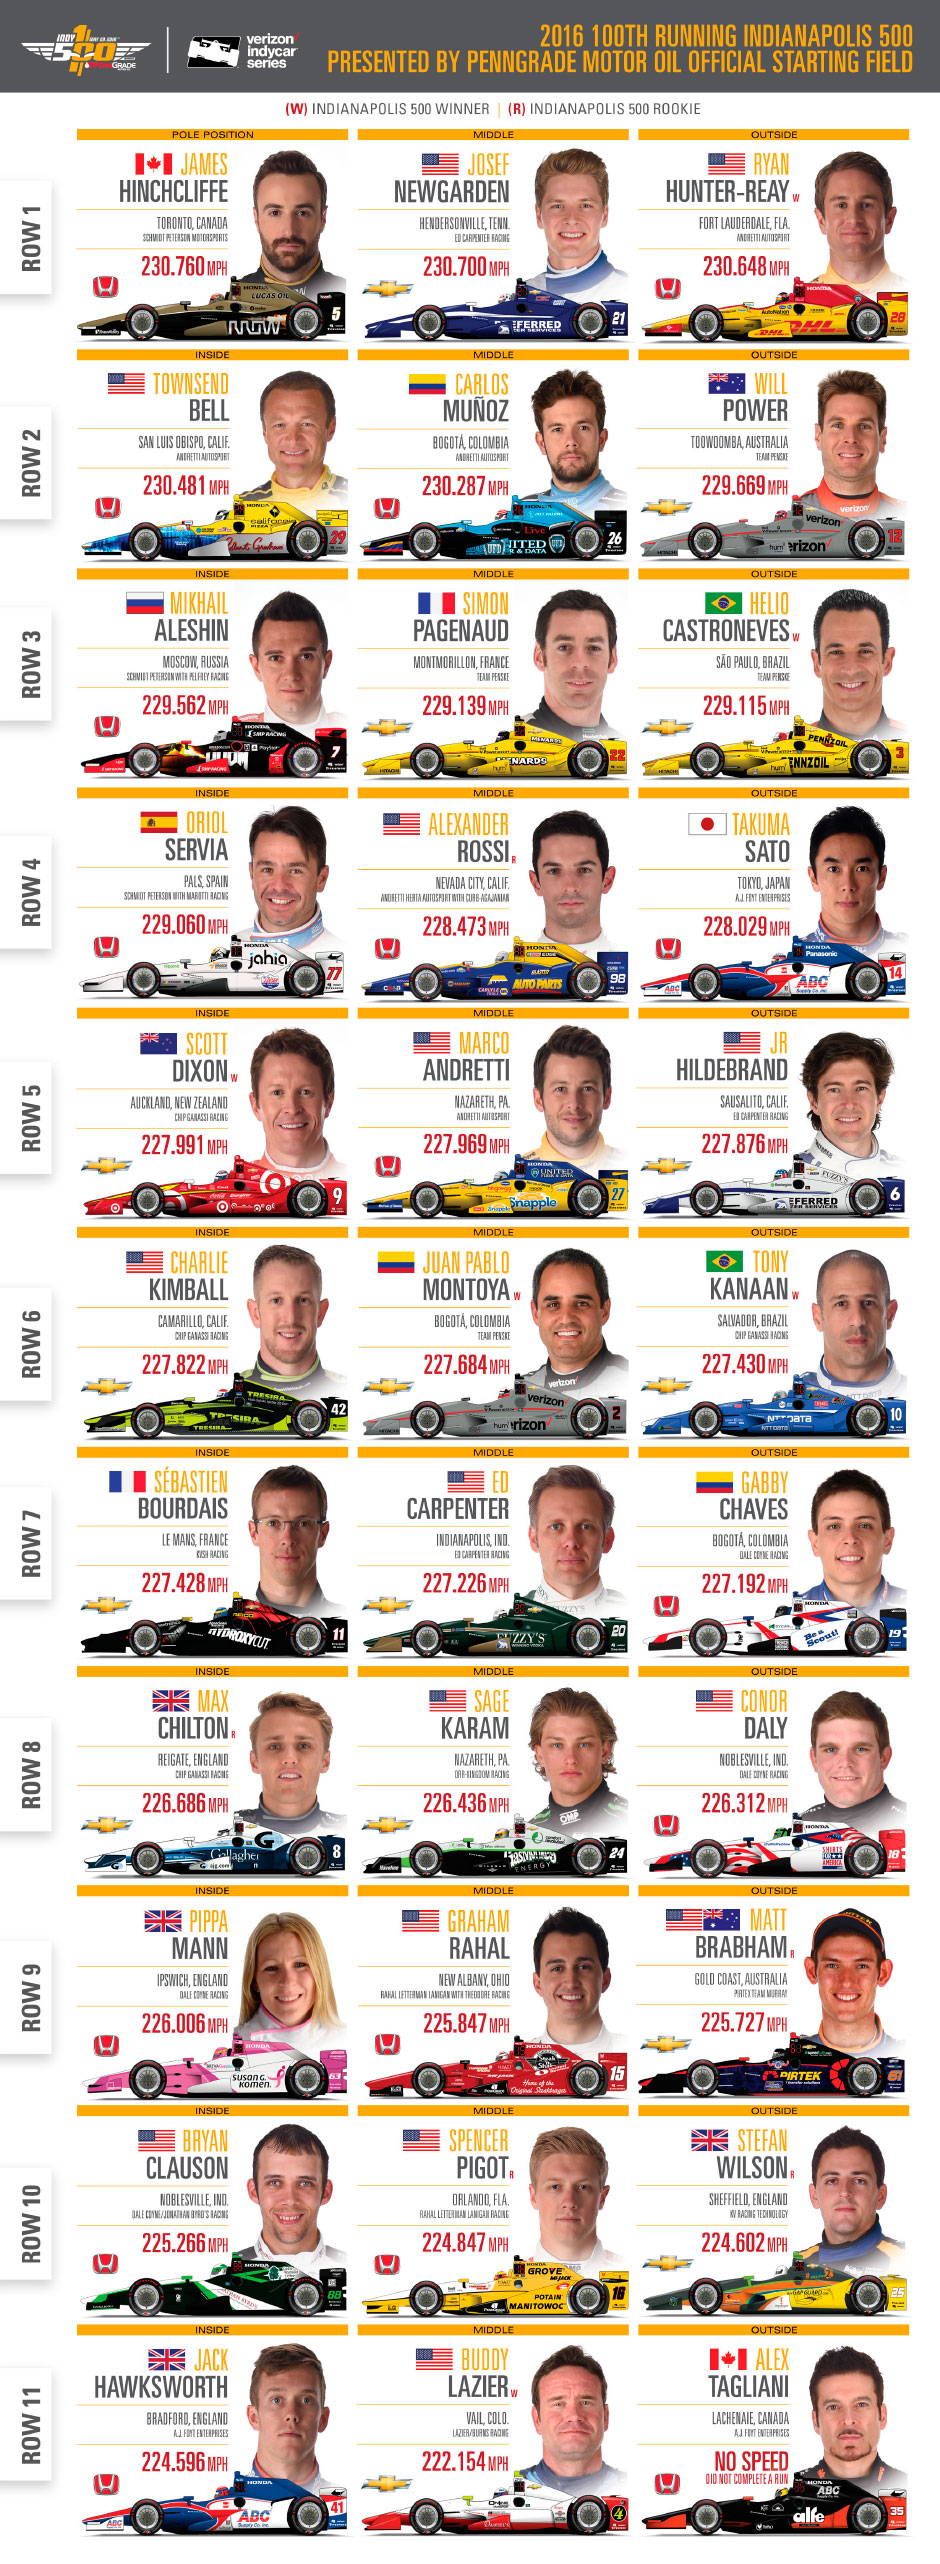 Starting lineup for the historic 100th Indianapolis 500